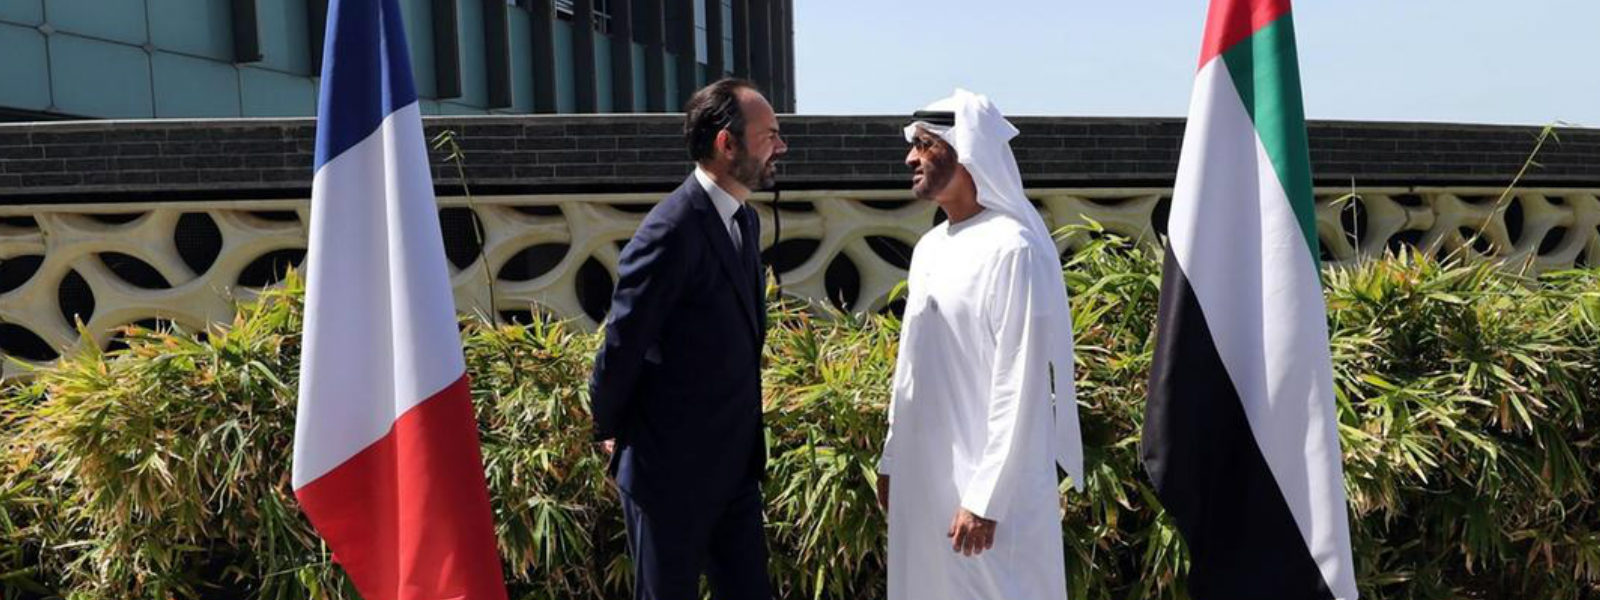 Abu Dhabi Crown Prince meets French PM in Paris